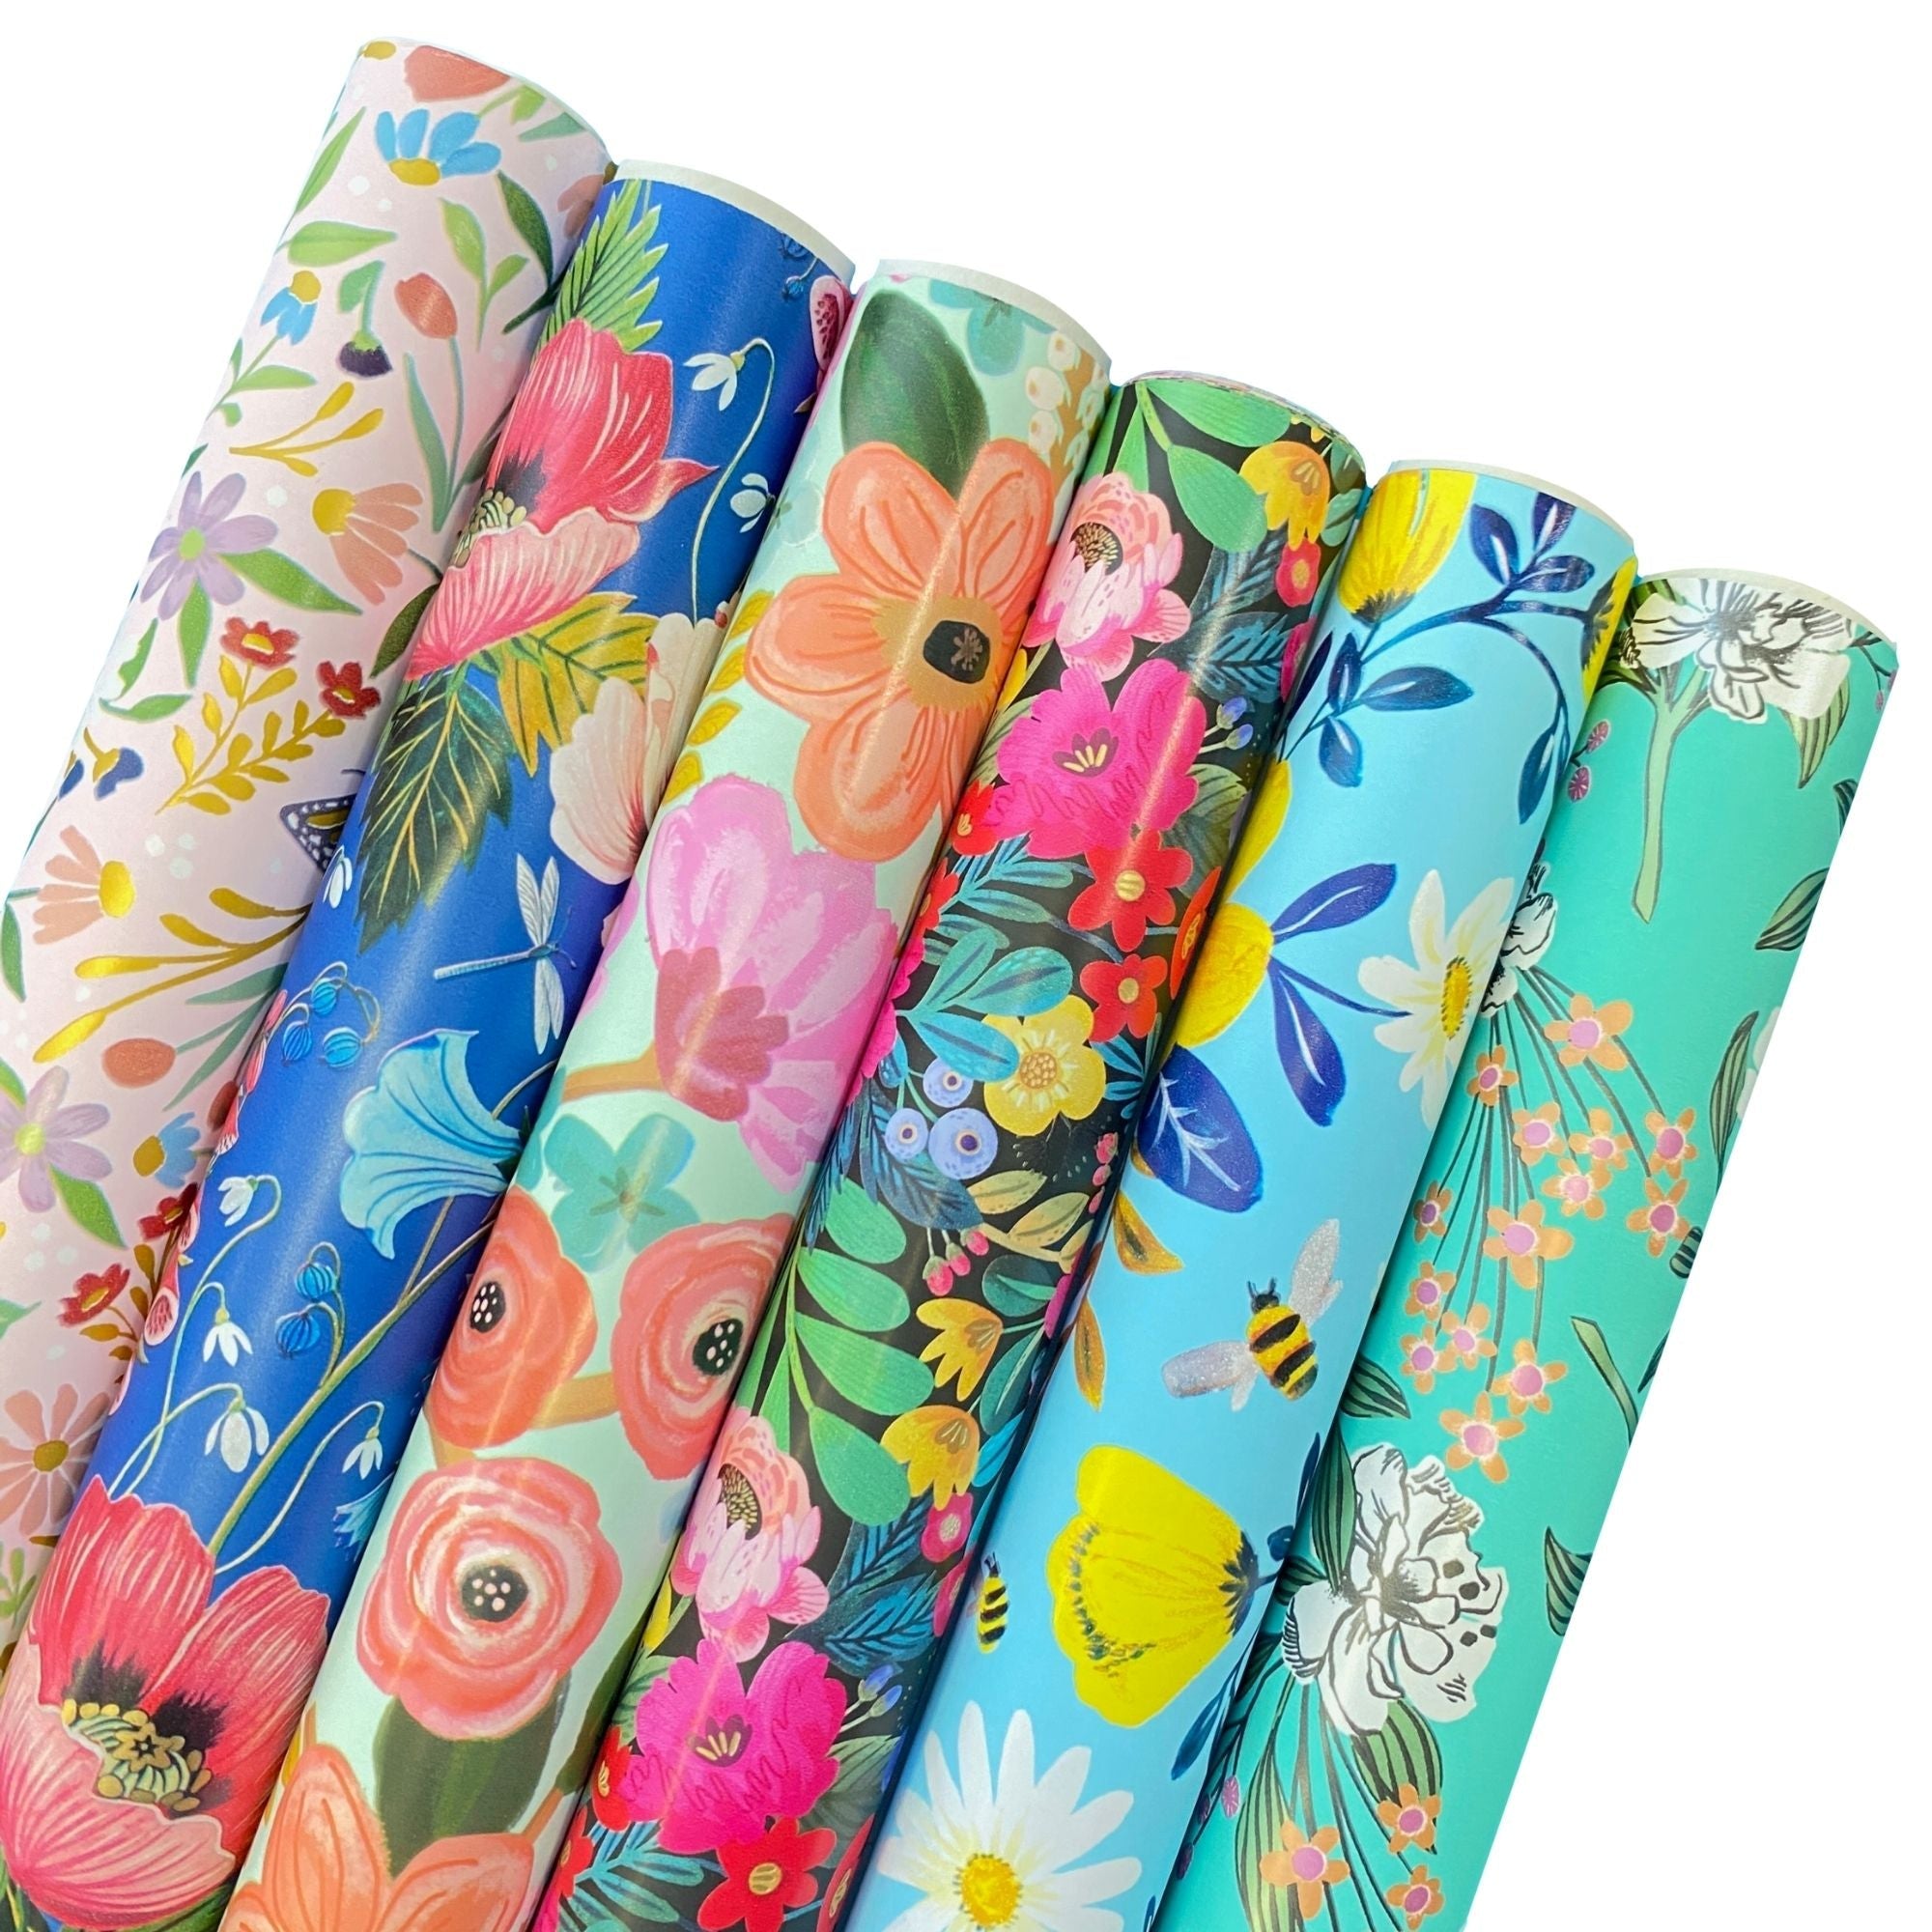  TOYANDONA 1 Roll gift wrapping paper floral wrapping